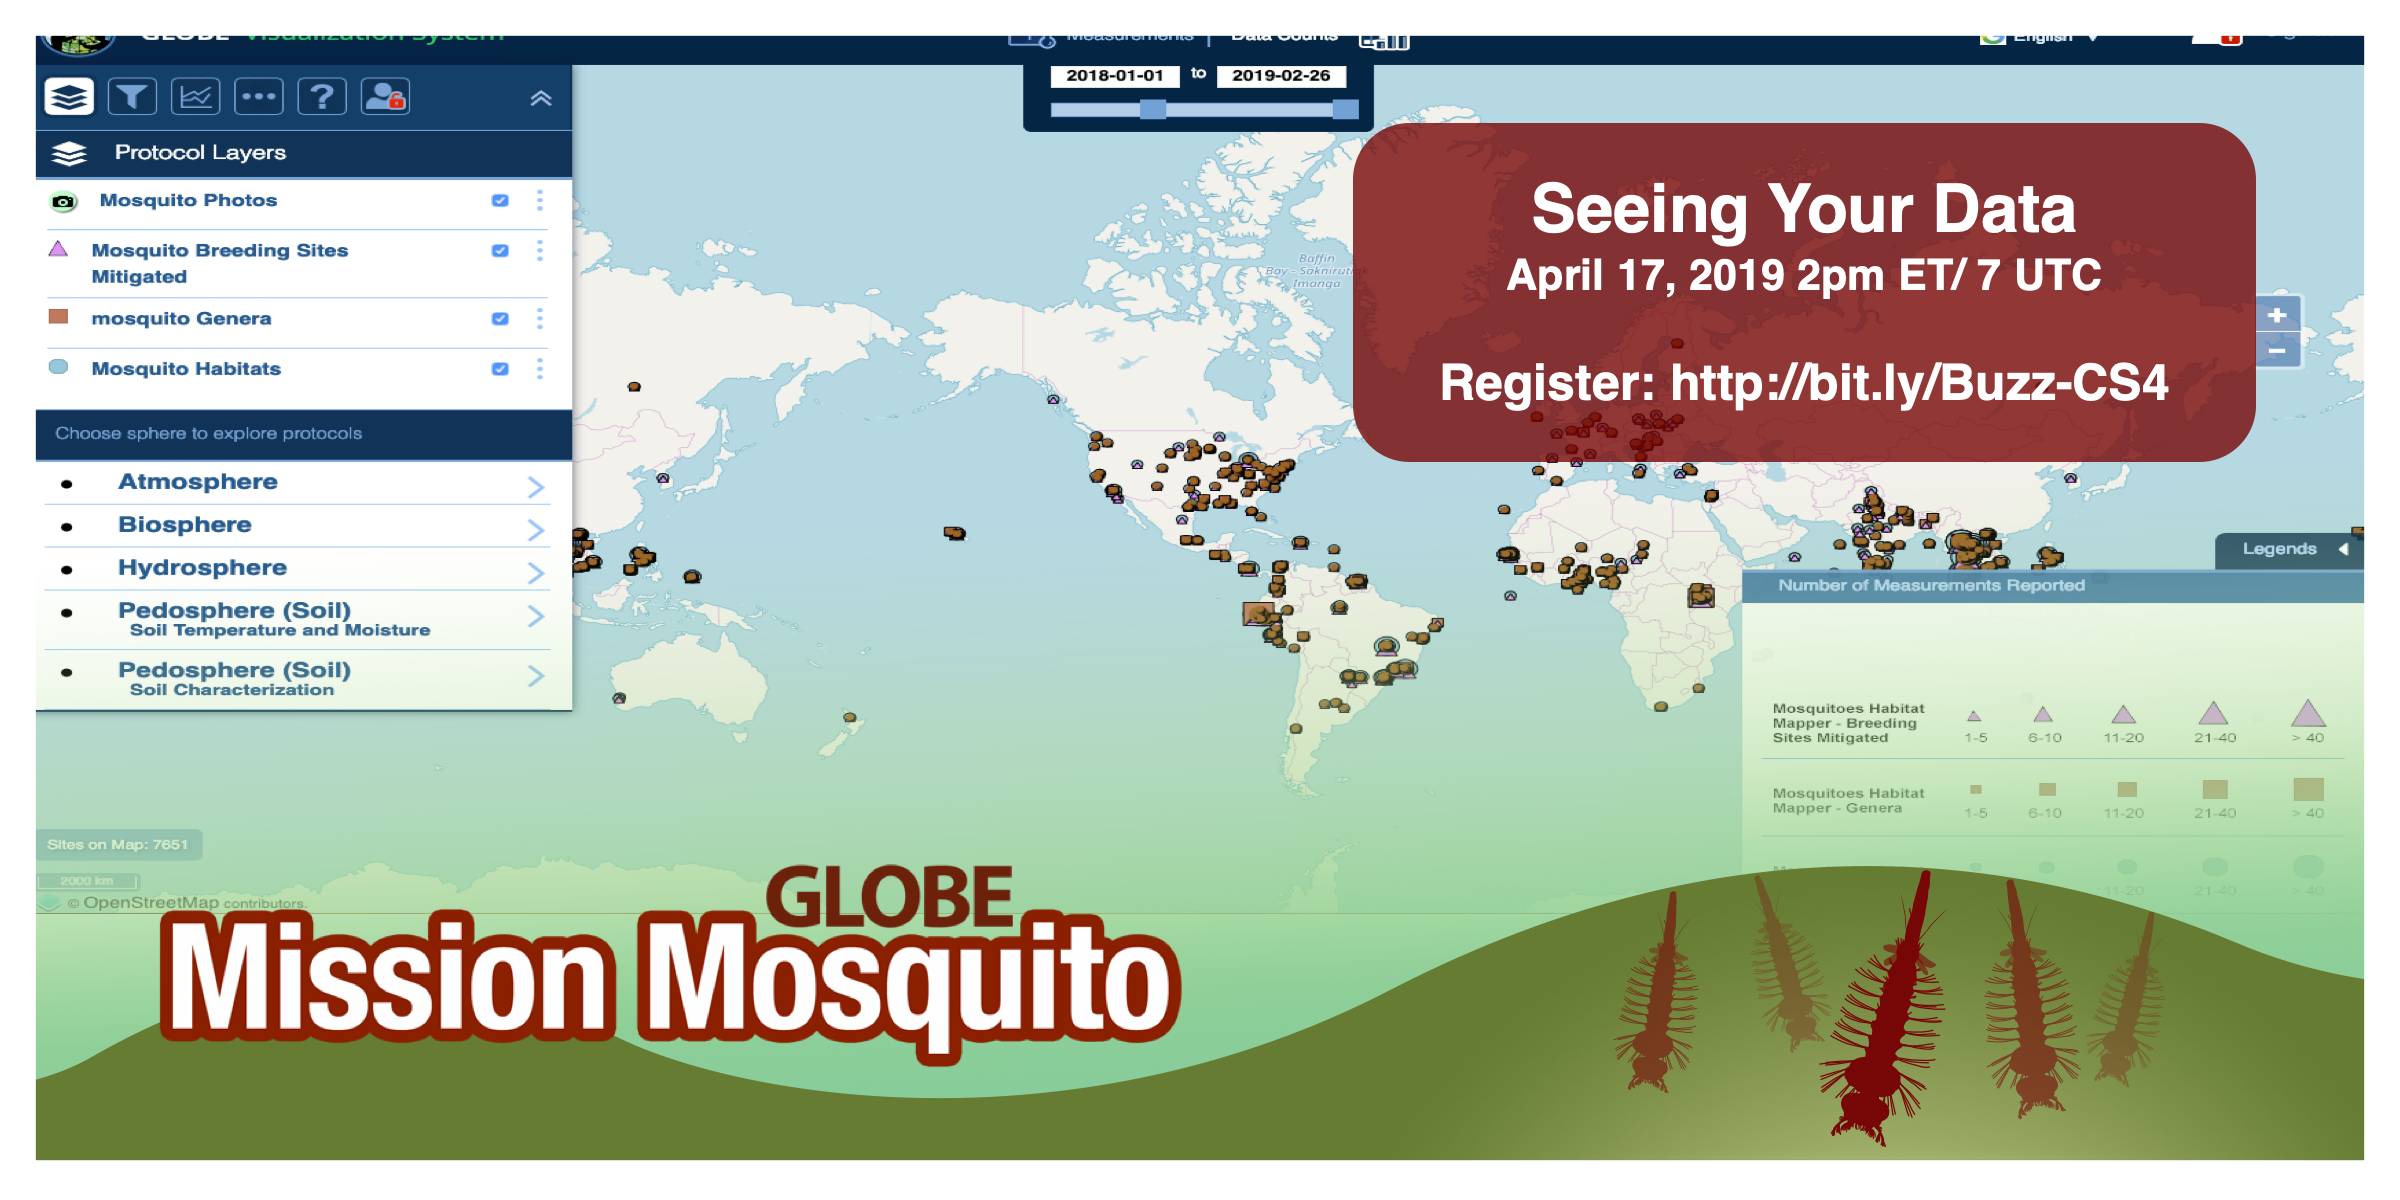 GLOBE Mission Mosquito webinar graphic, with time/date